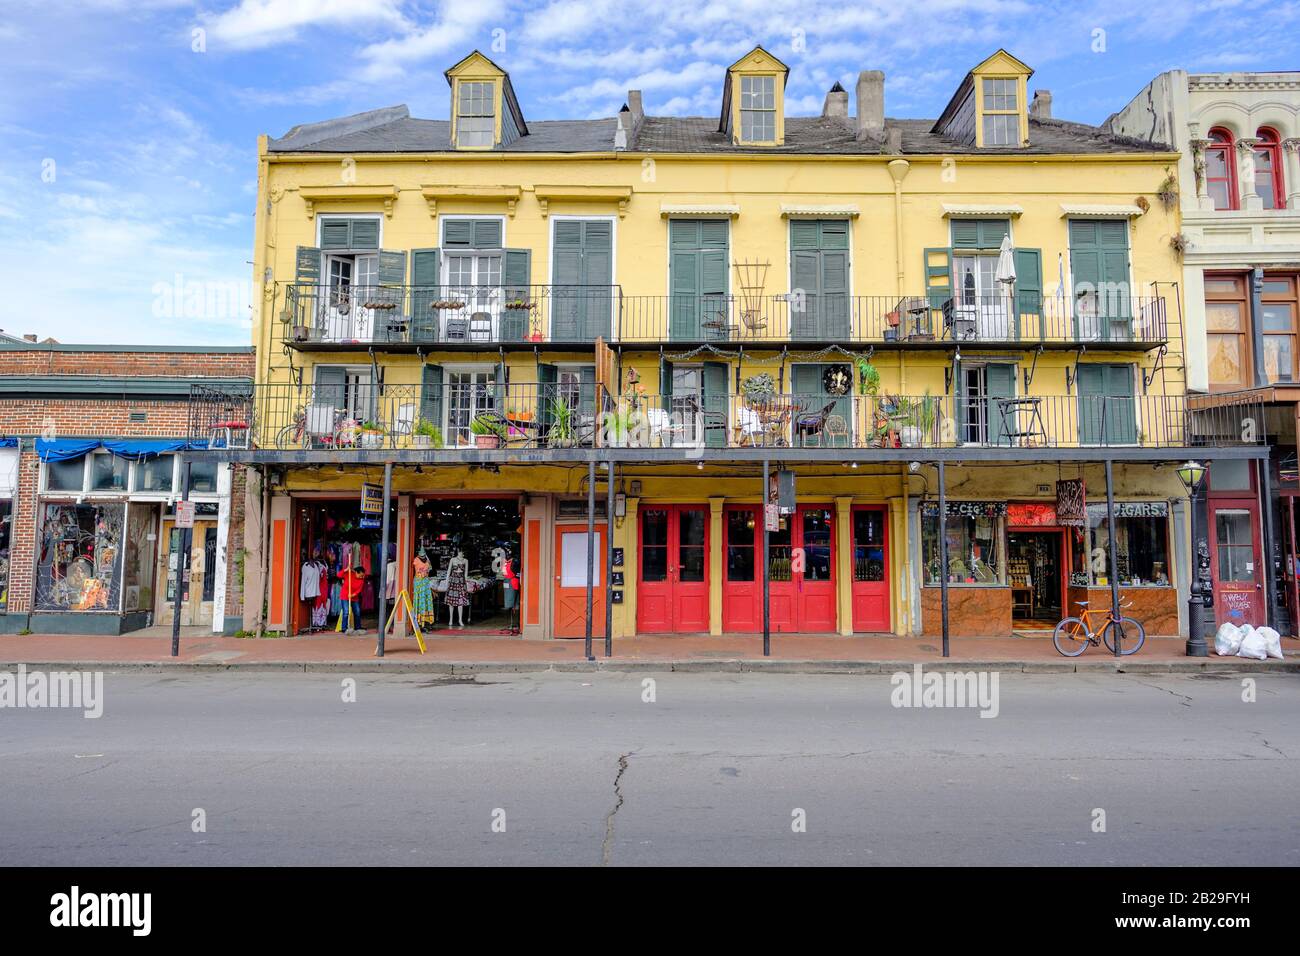 Typical architecture, retail, commercial, store buildings on Decatur Street, New Orleans French Quarter New Orleans, Louisiana, USA Stock Photo